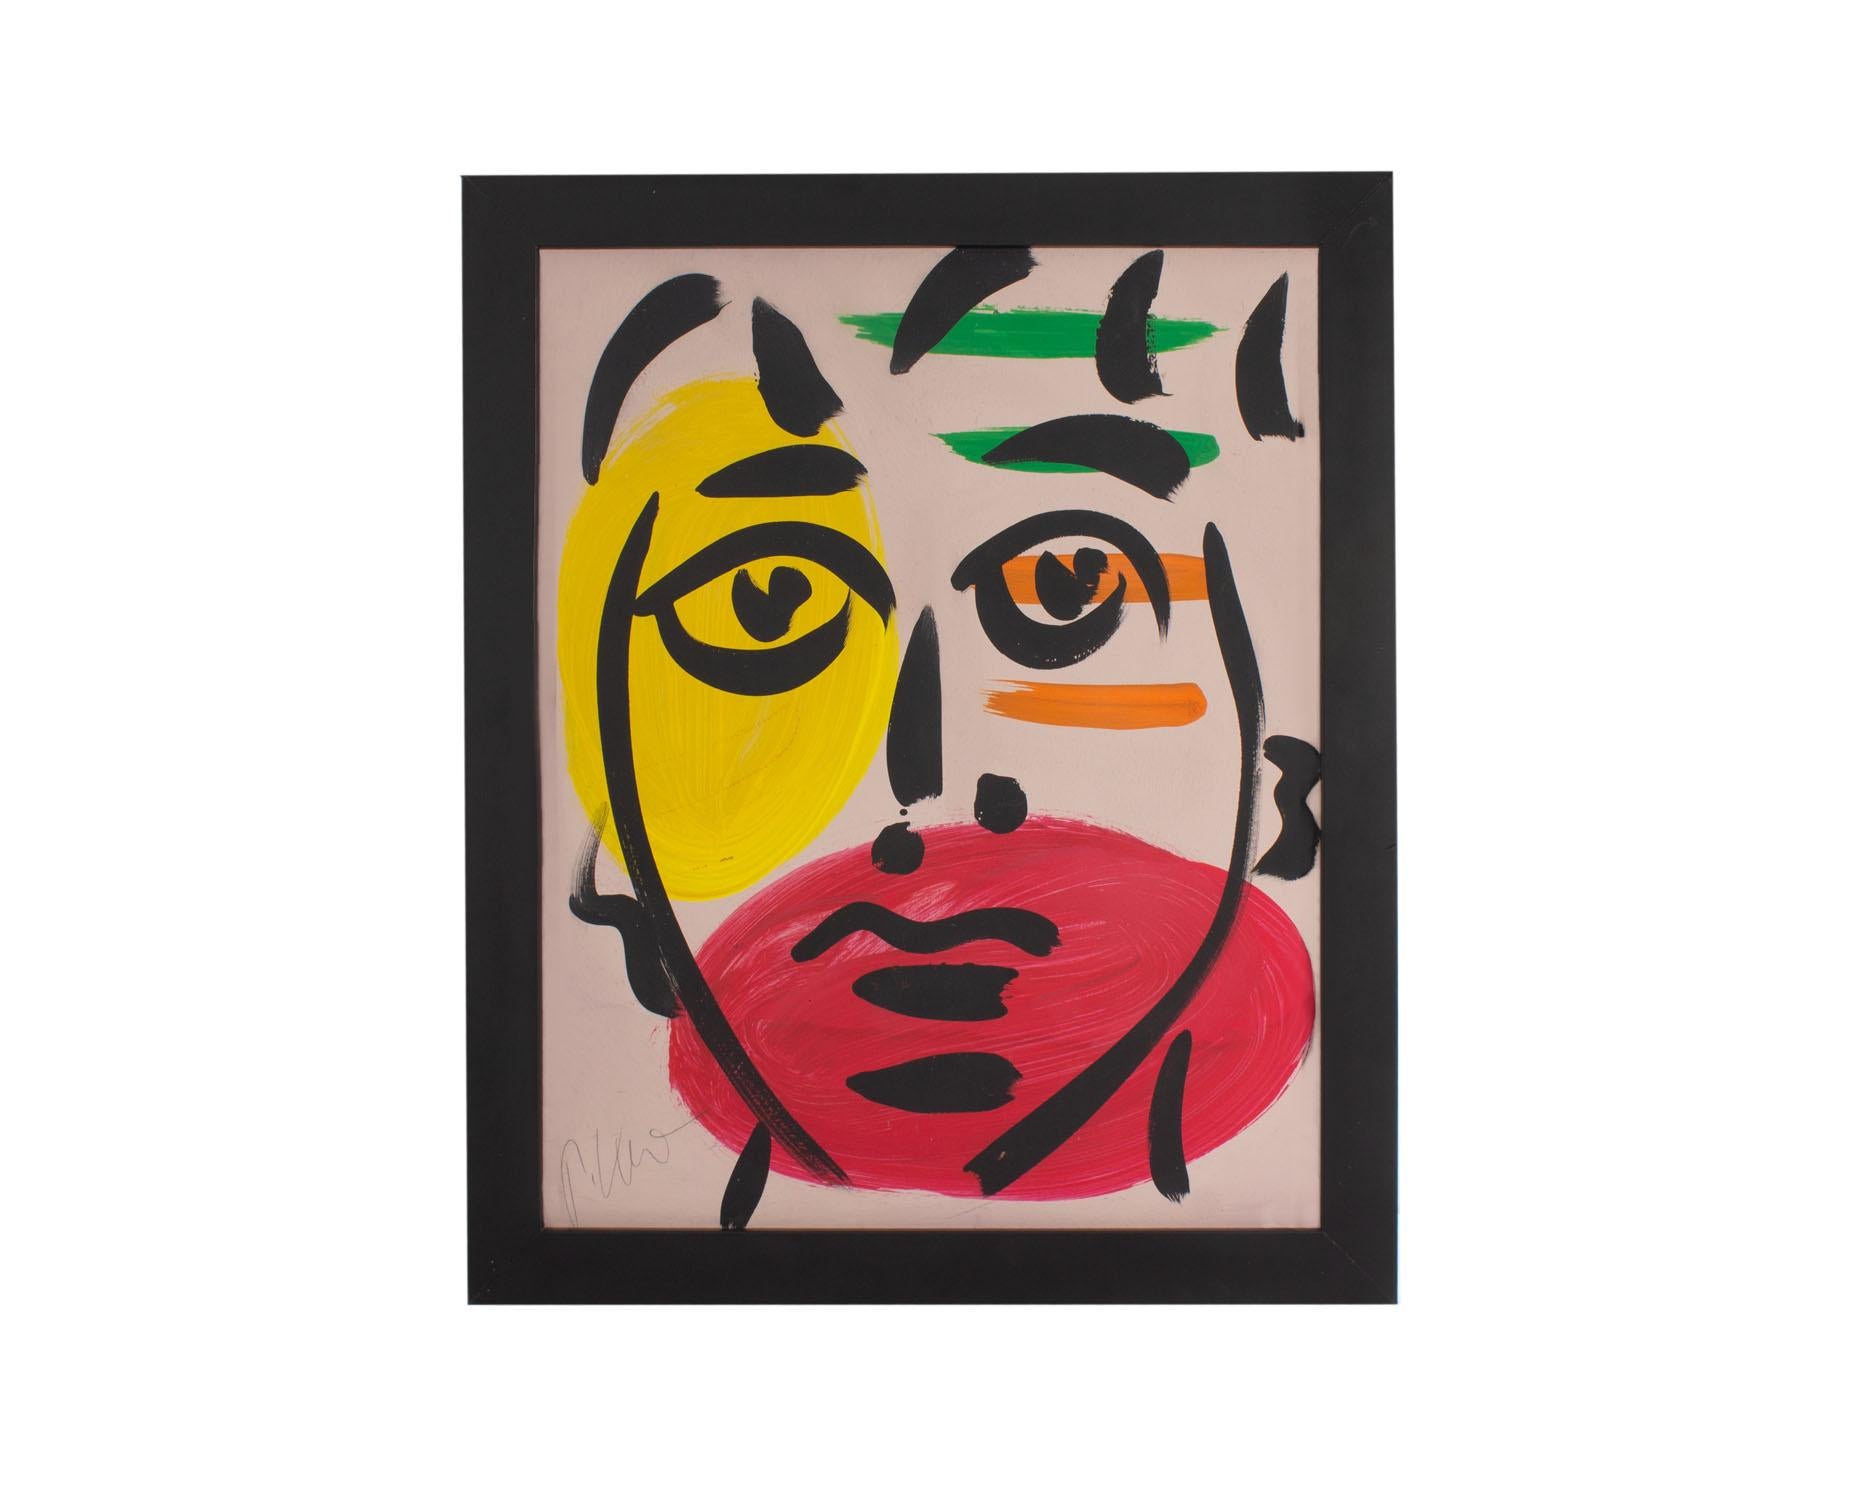 An abstract portrait tempera painting signed by German artist Peter Keil (born 1942). Signed to the lower left corner, this composition depicts an abstract portrait composed of broad colorful brushstrokes upon a light gray ground. The painting is